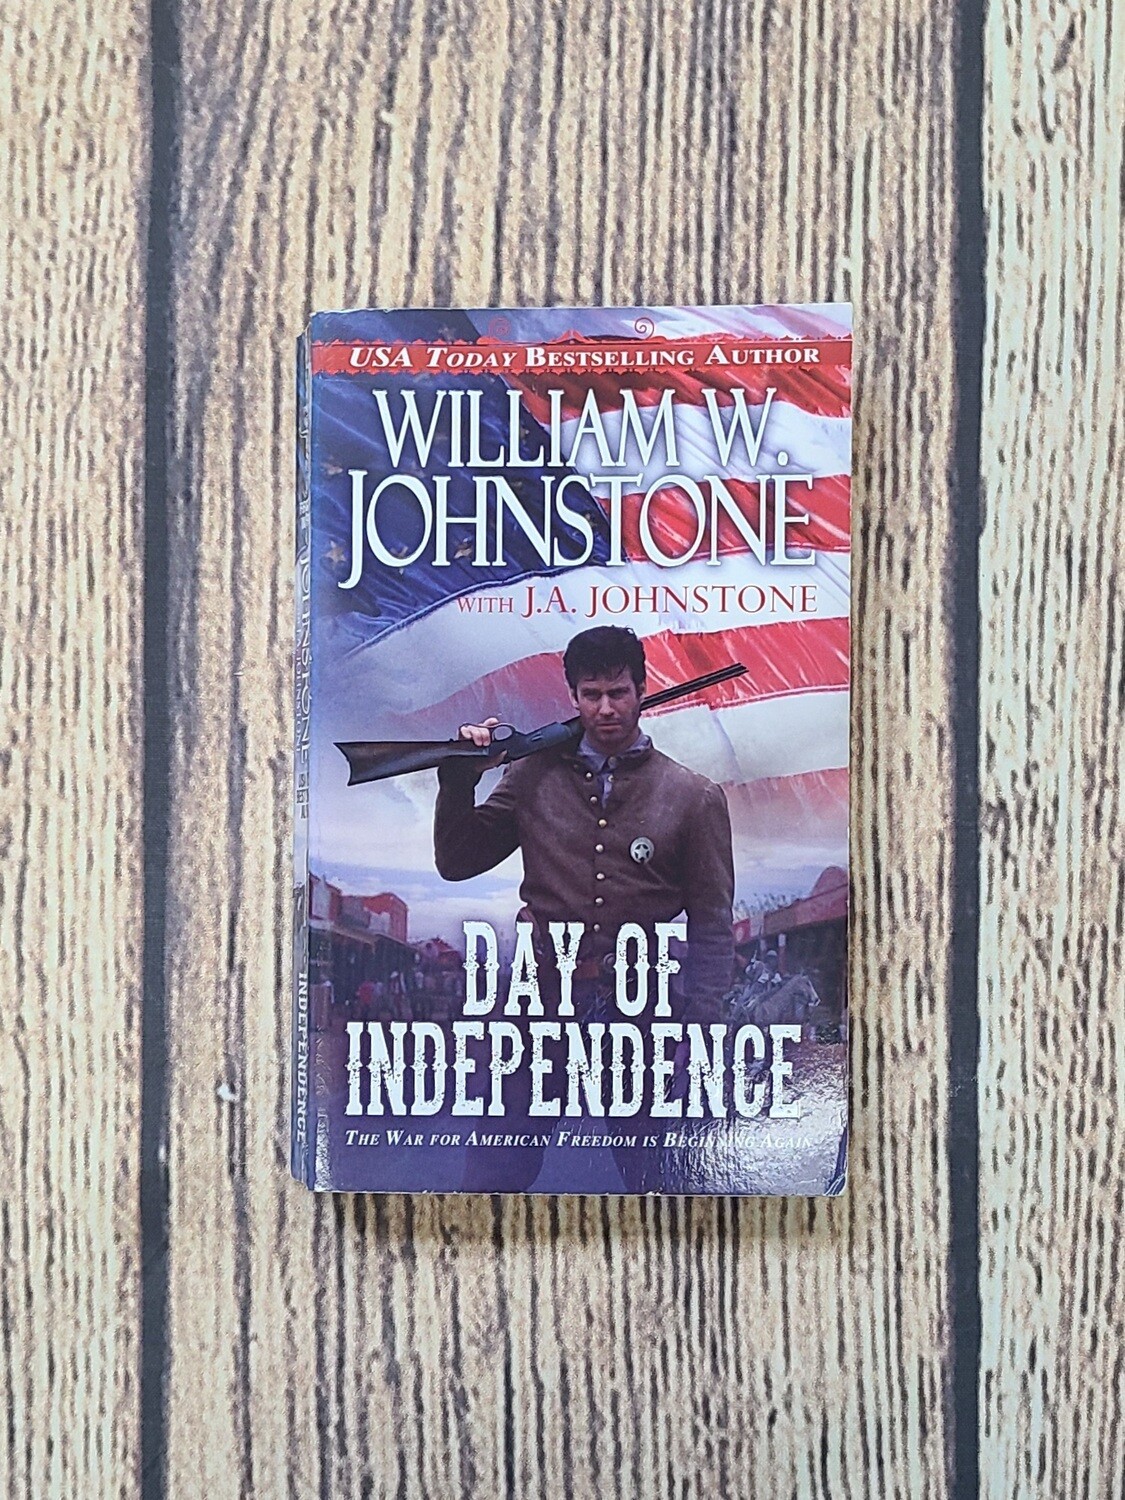 Day of Independence by William W. Johnstone with J.A. Johnstone